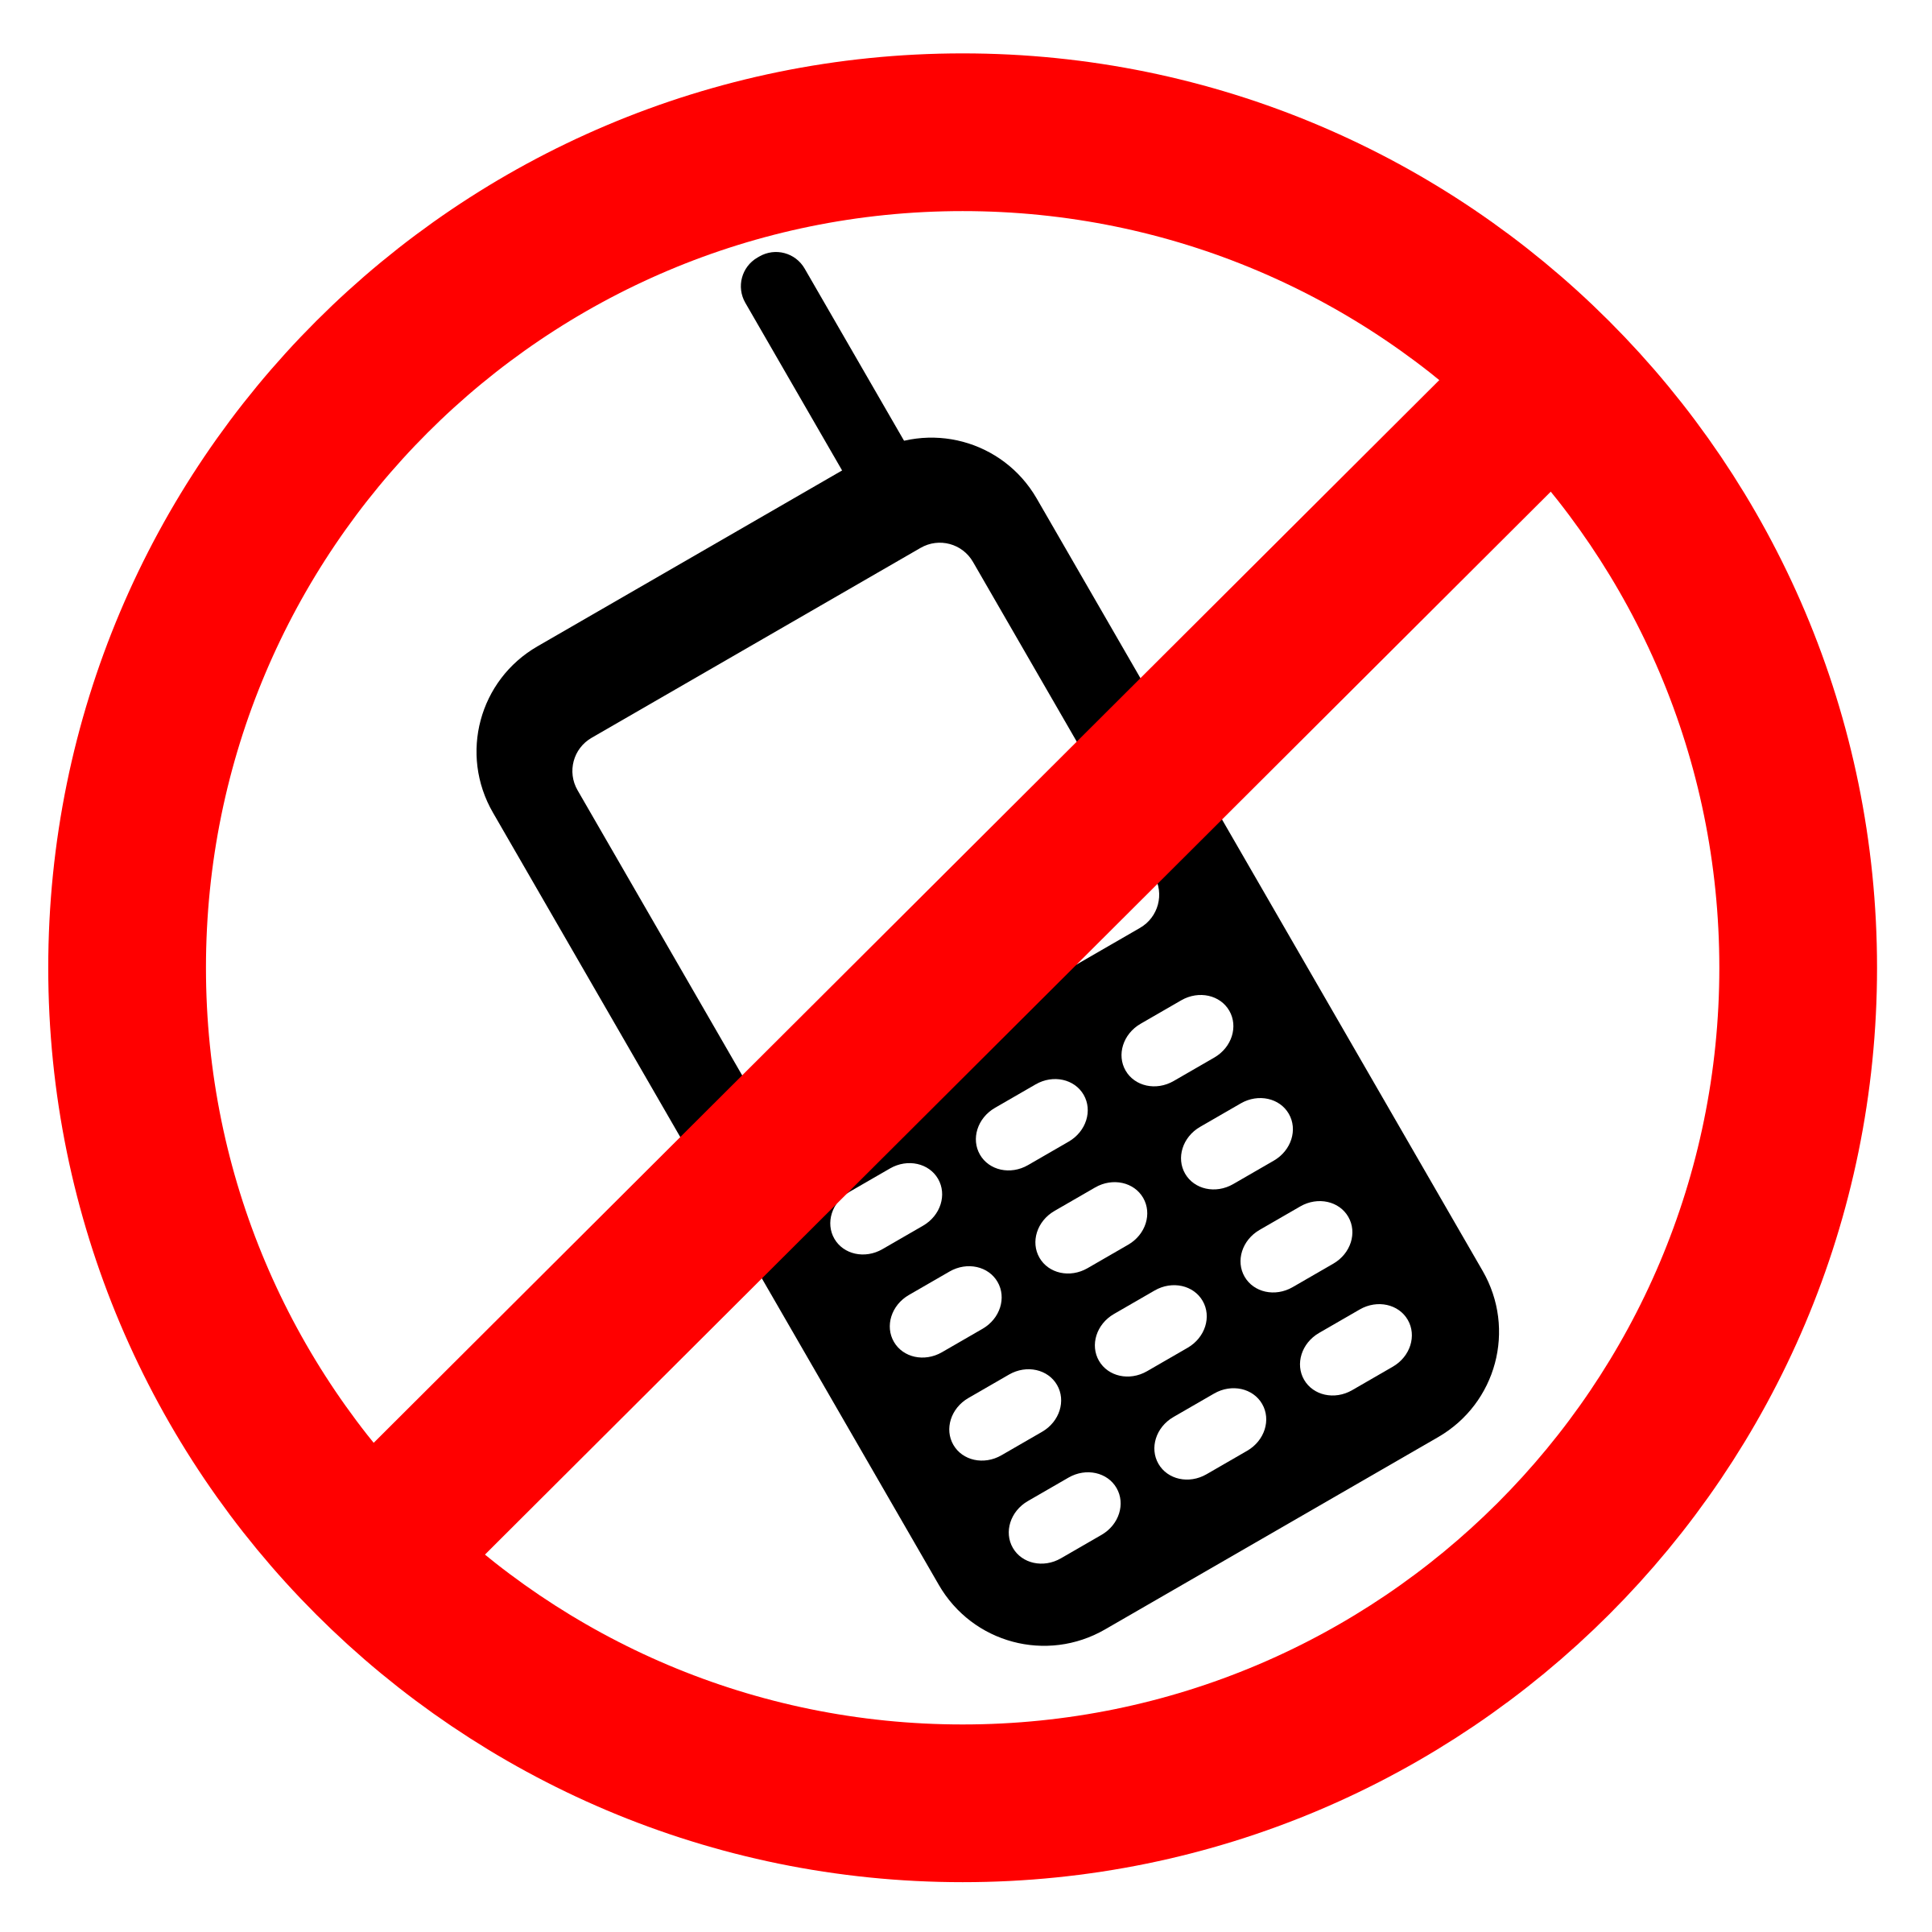 Mobile phone clipart clipart.